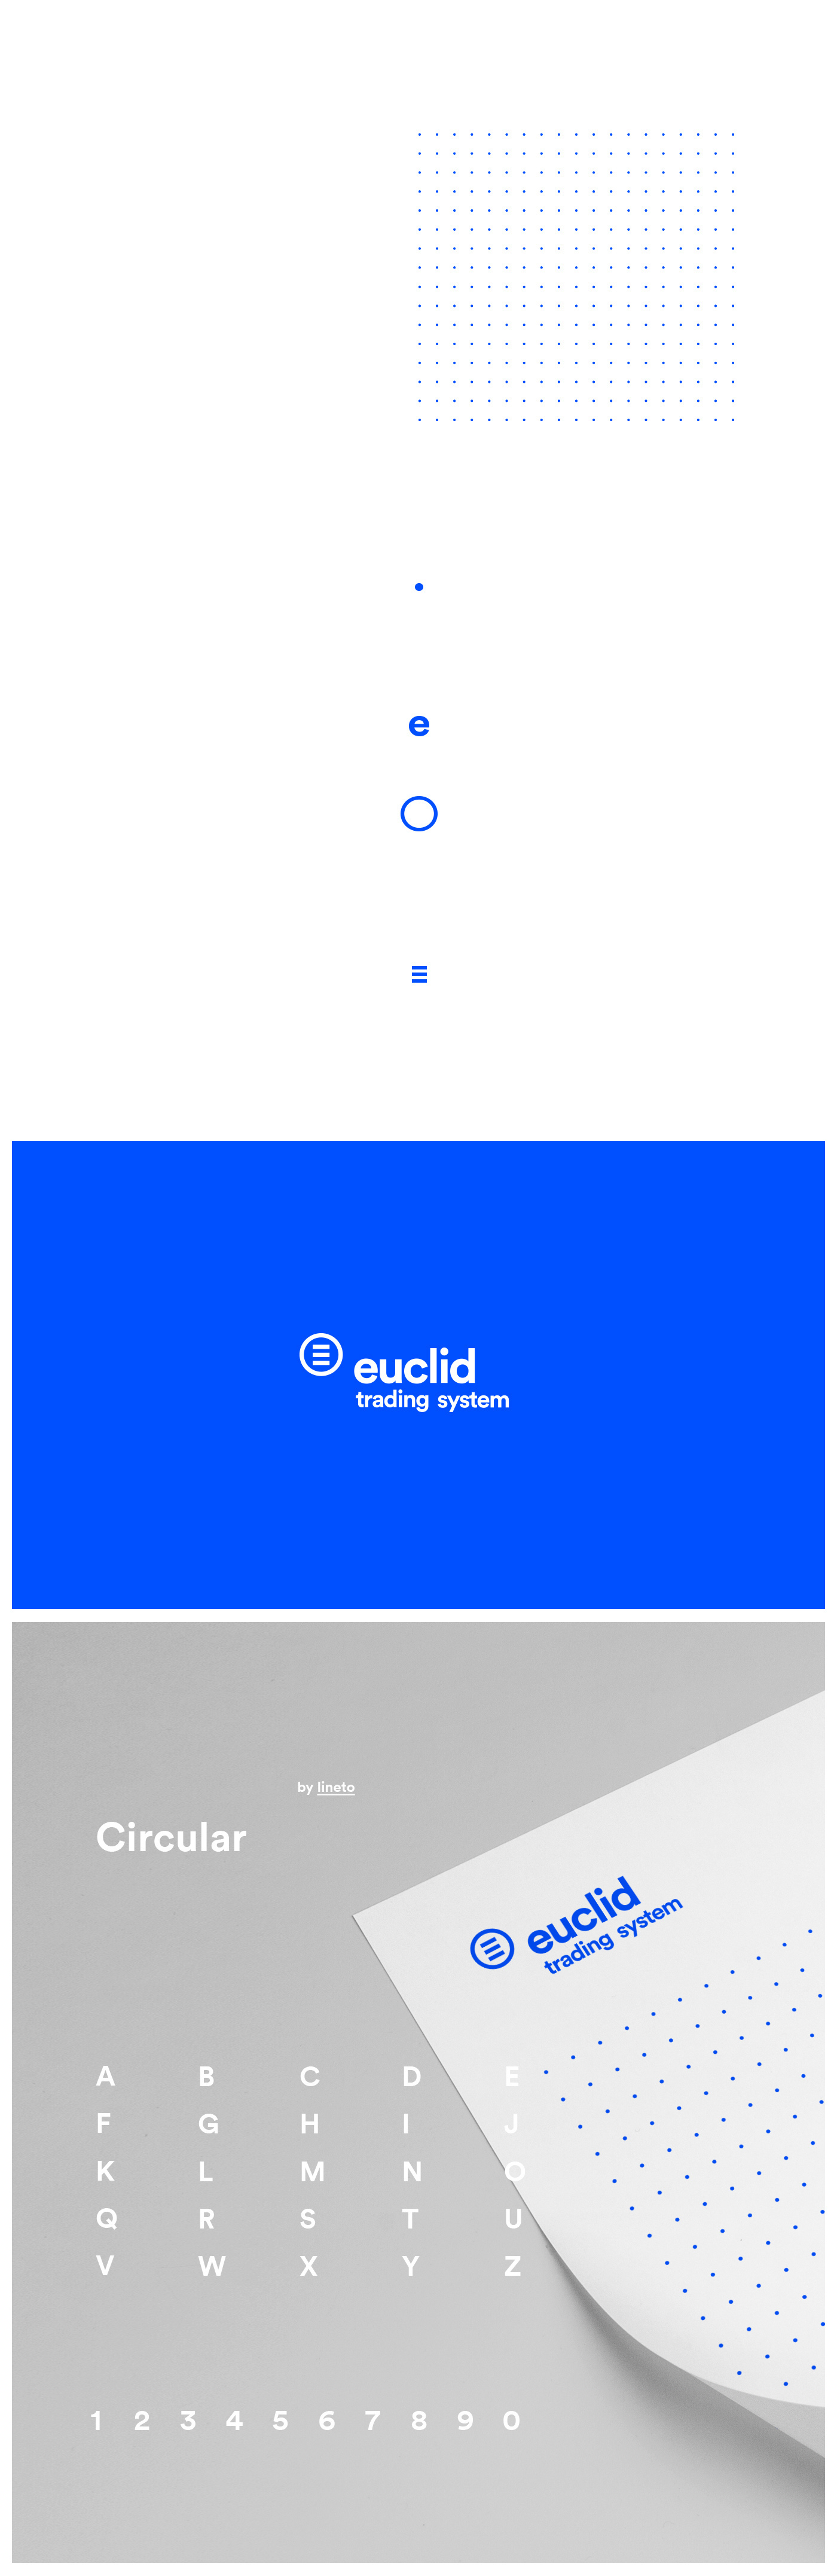 redesign identity euclid trading system logo business card